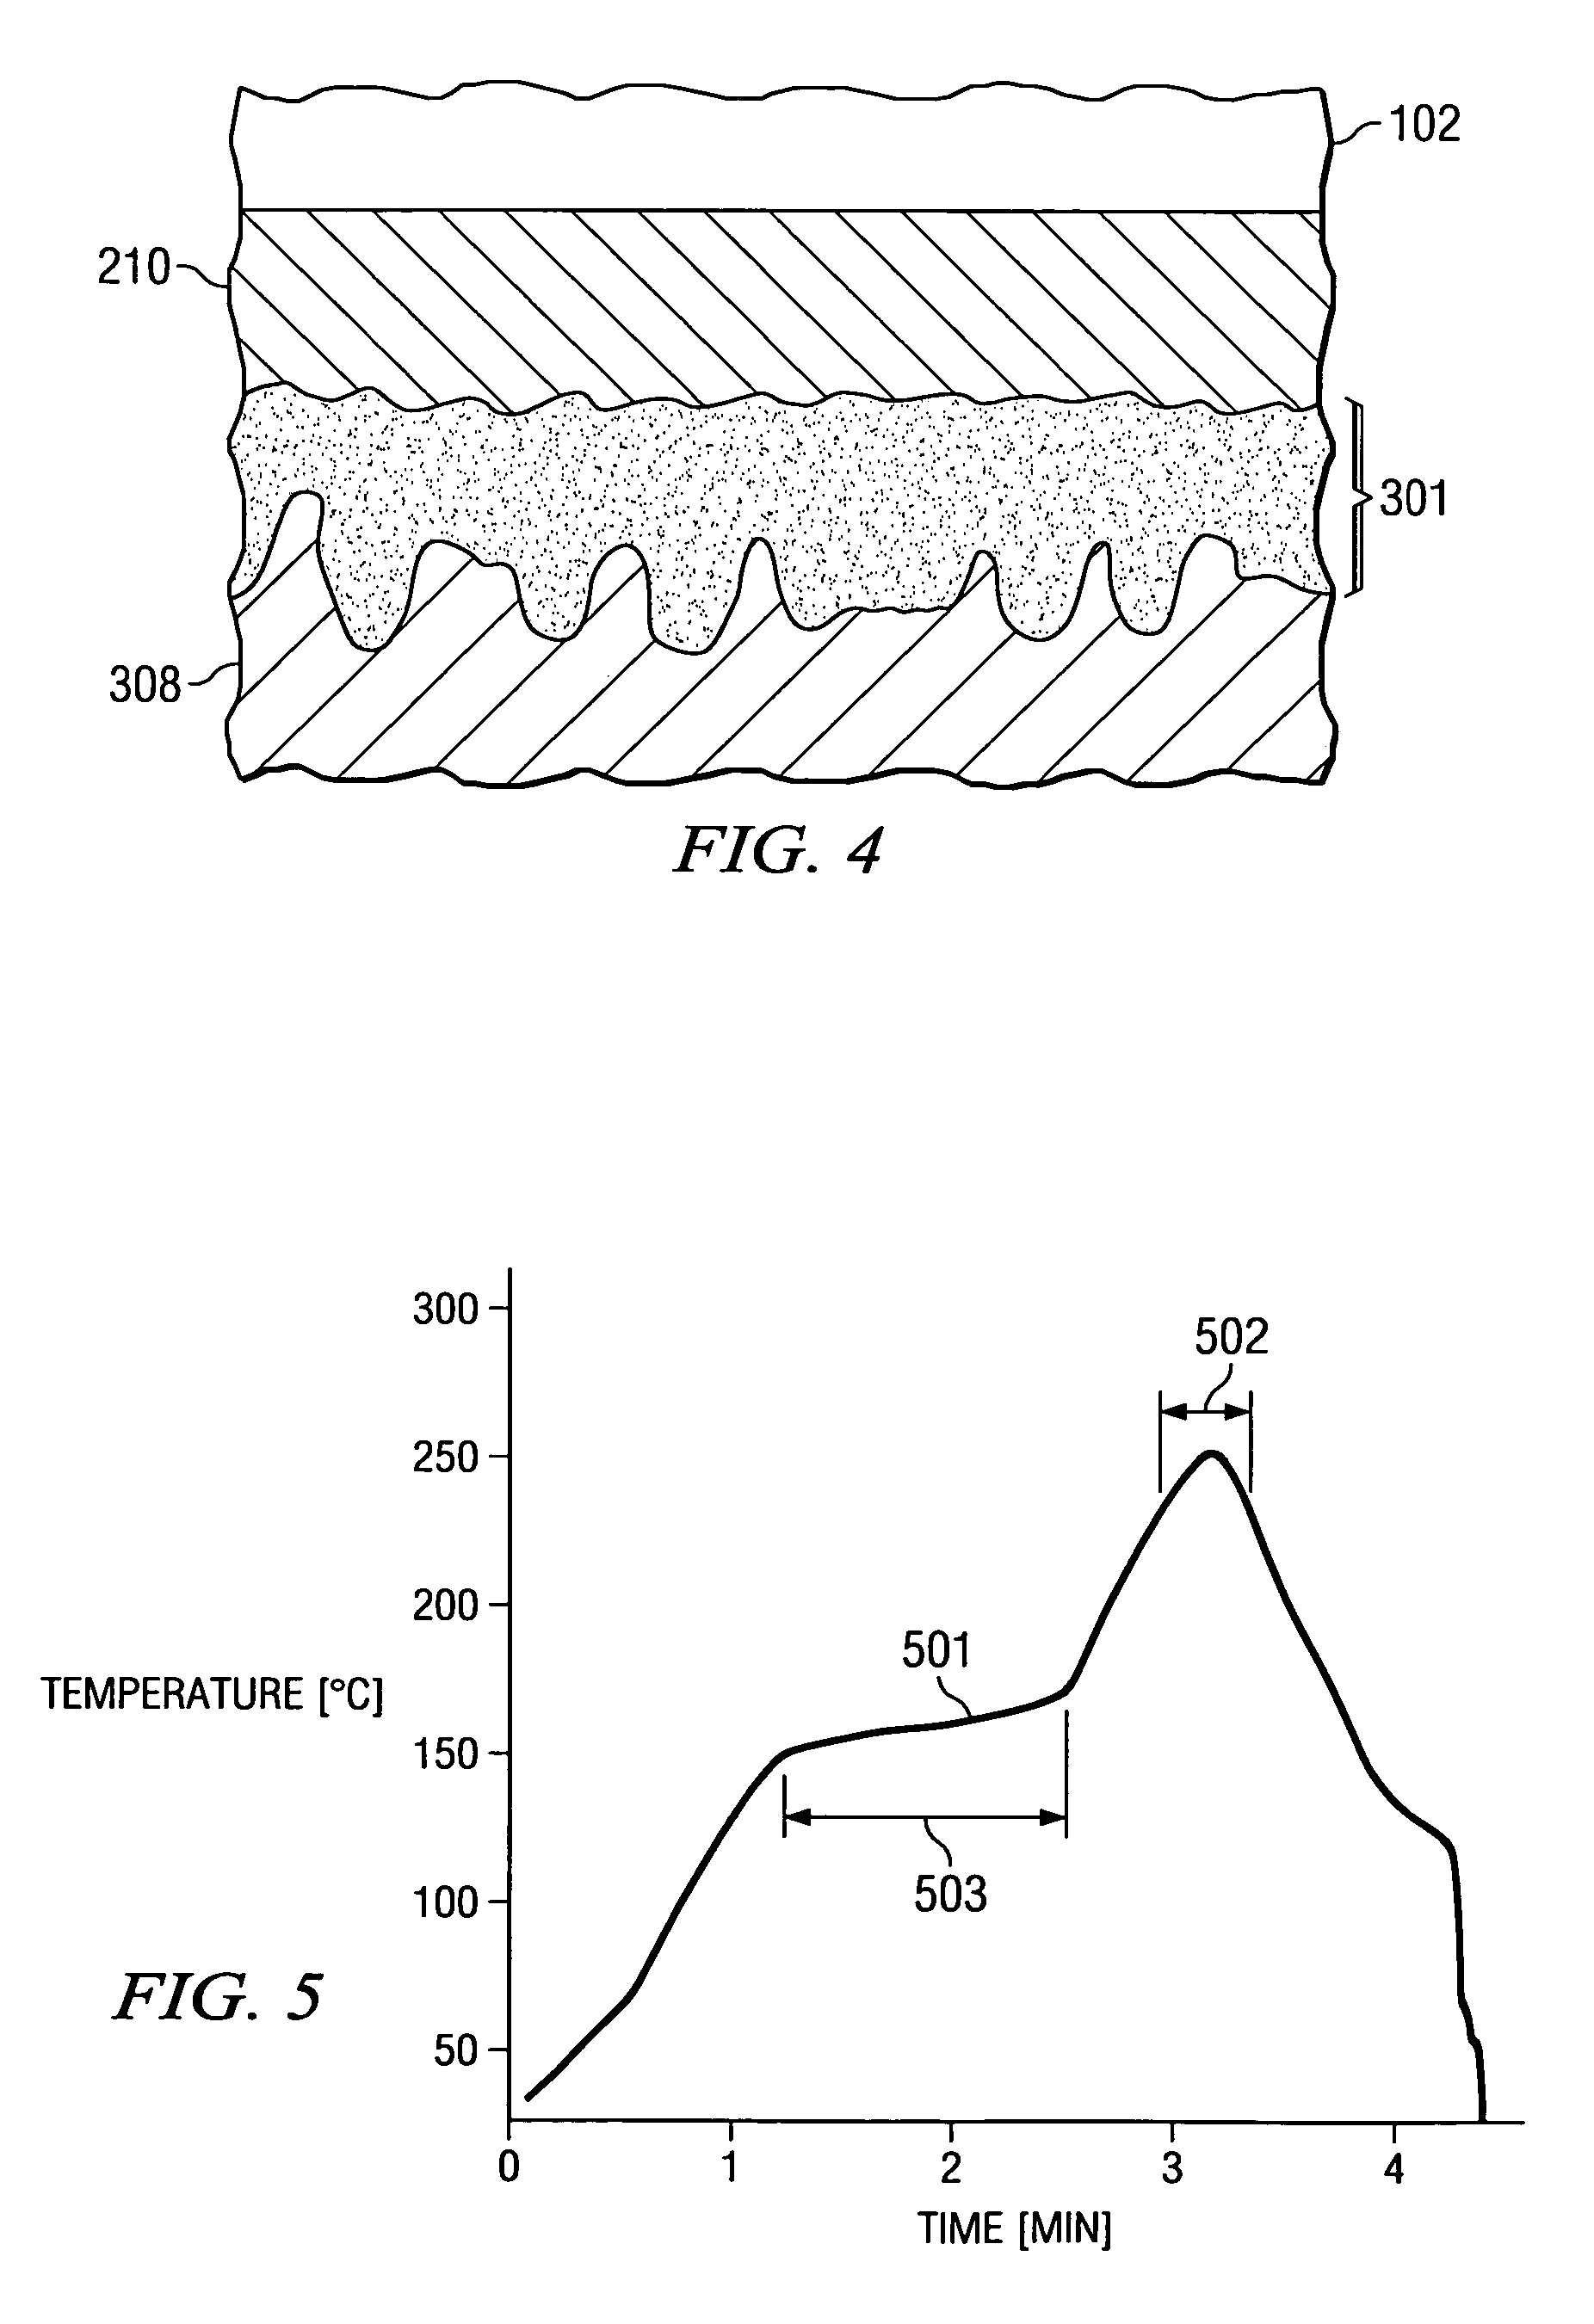 Semiconductor device with improved contacts